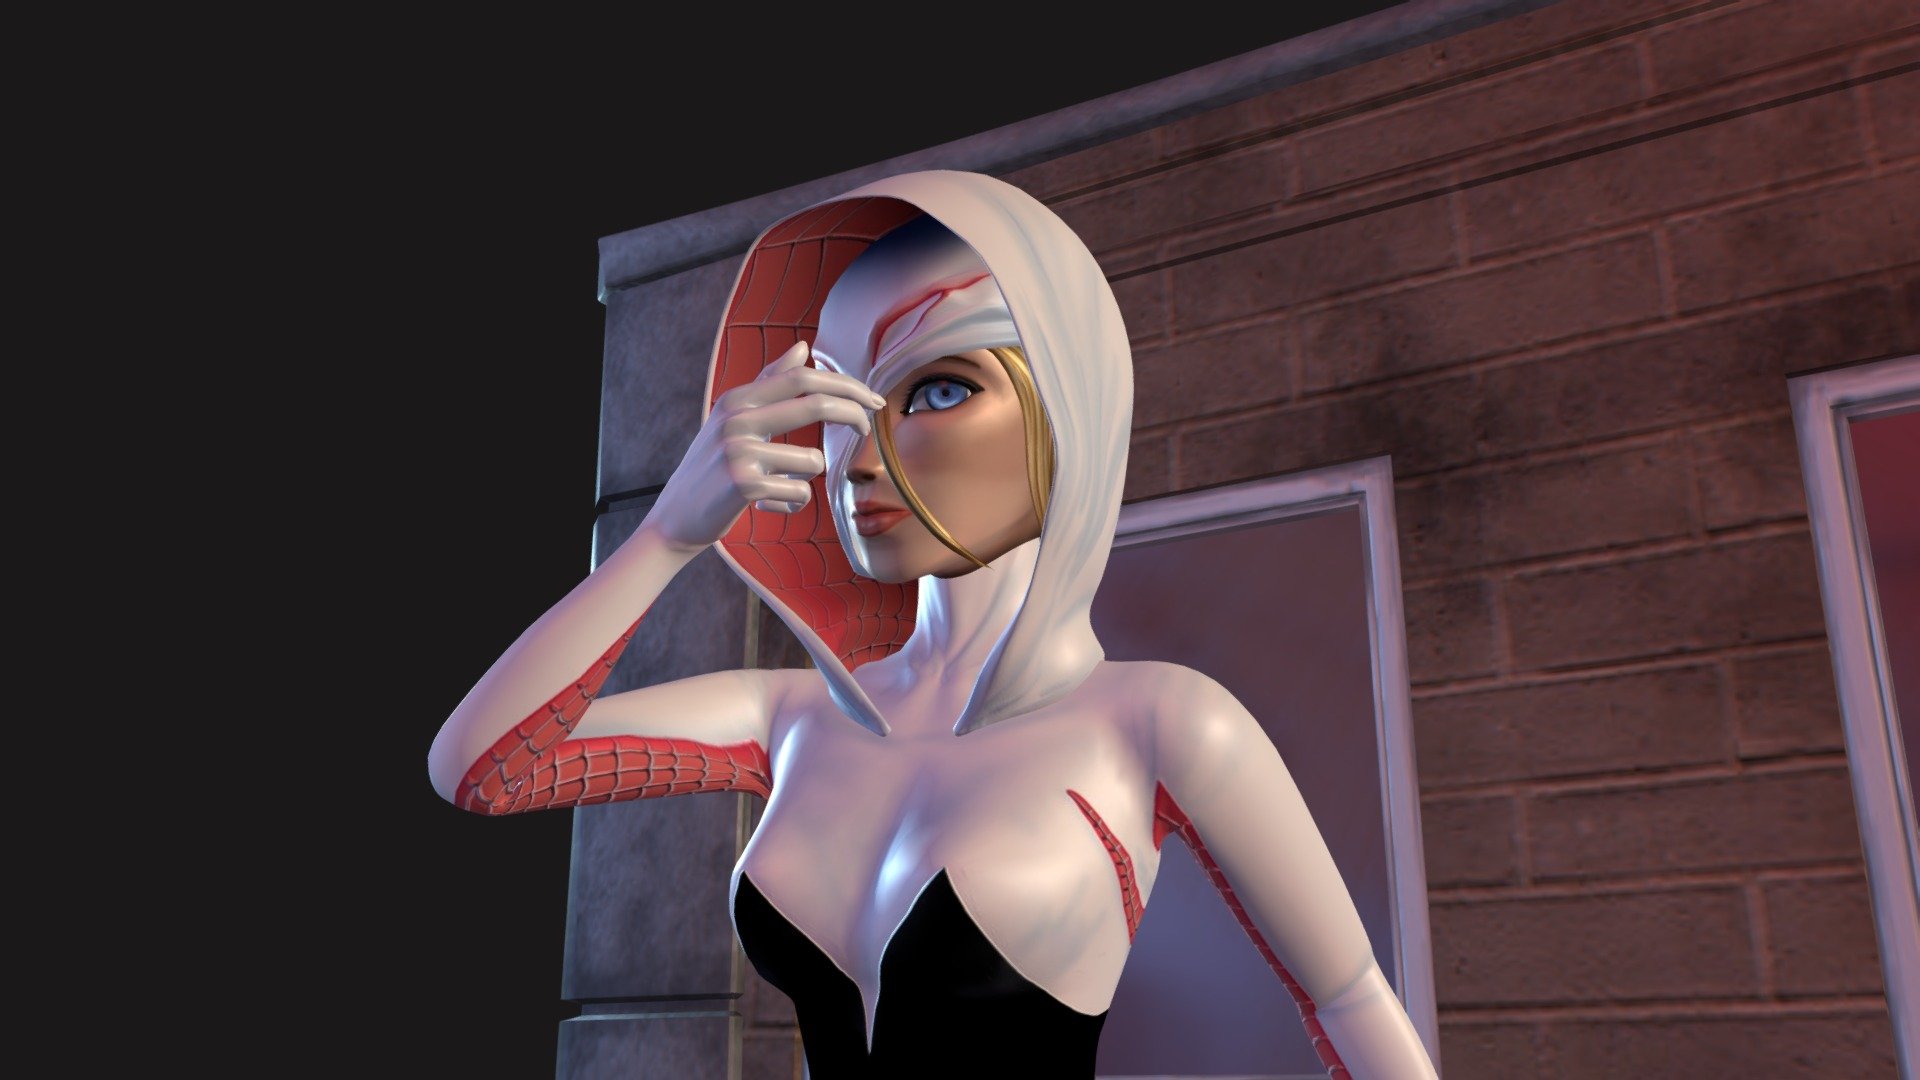 I like the idea that Gwen (Spiderman's first girlfriend) has become a superhero.
Here is my version of SpiderGwen.
Look at the back of the model for a surprise - Spider Gwen - 3D model by ChrisD-3D 3d model